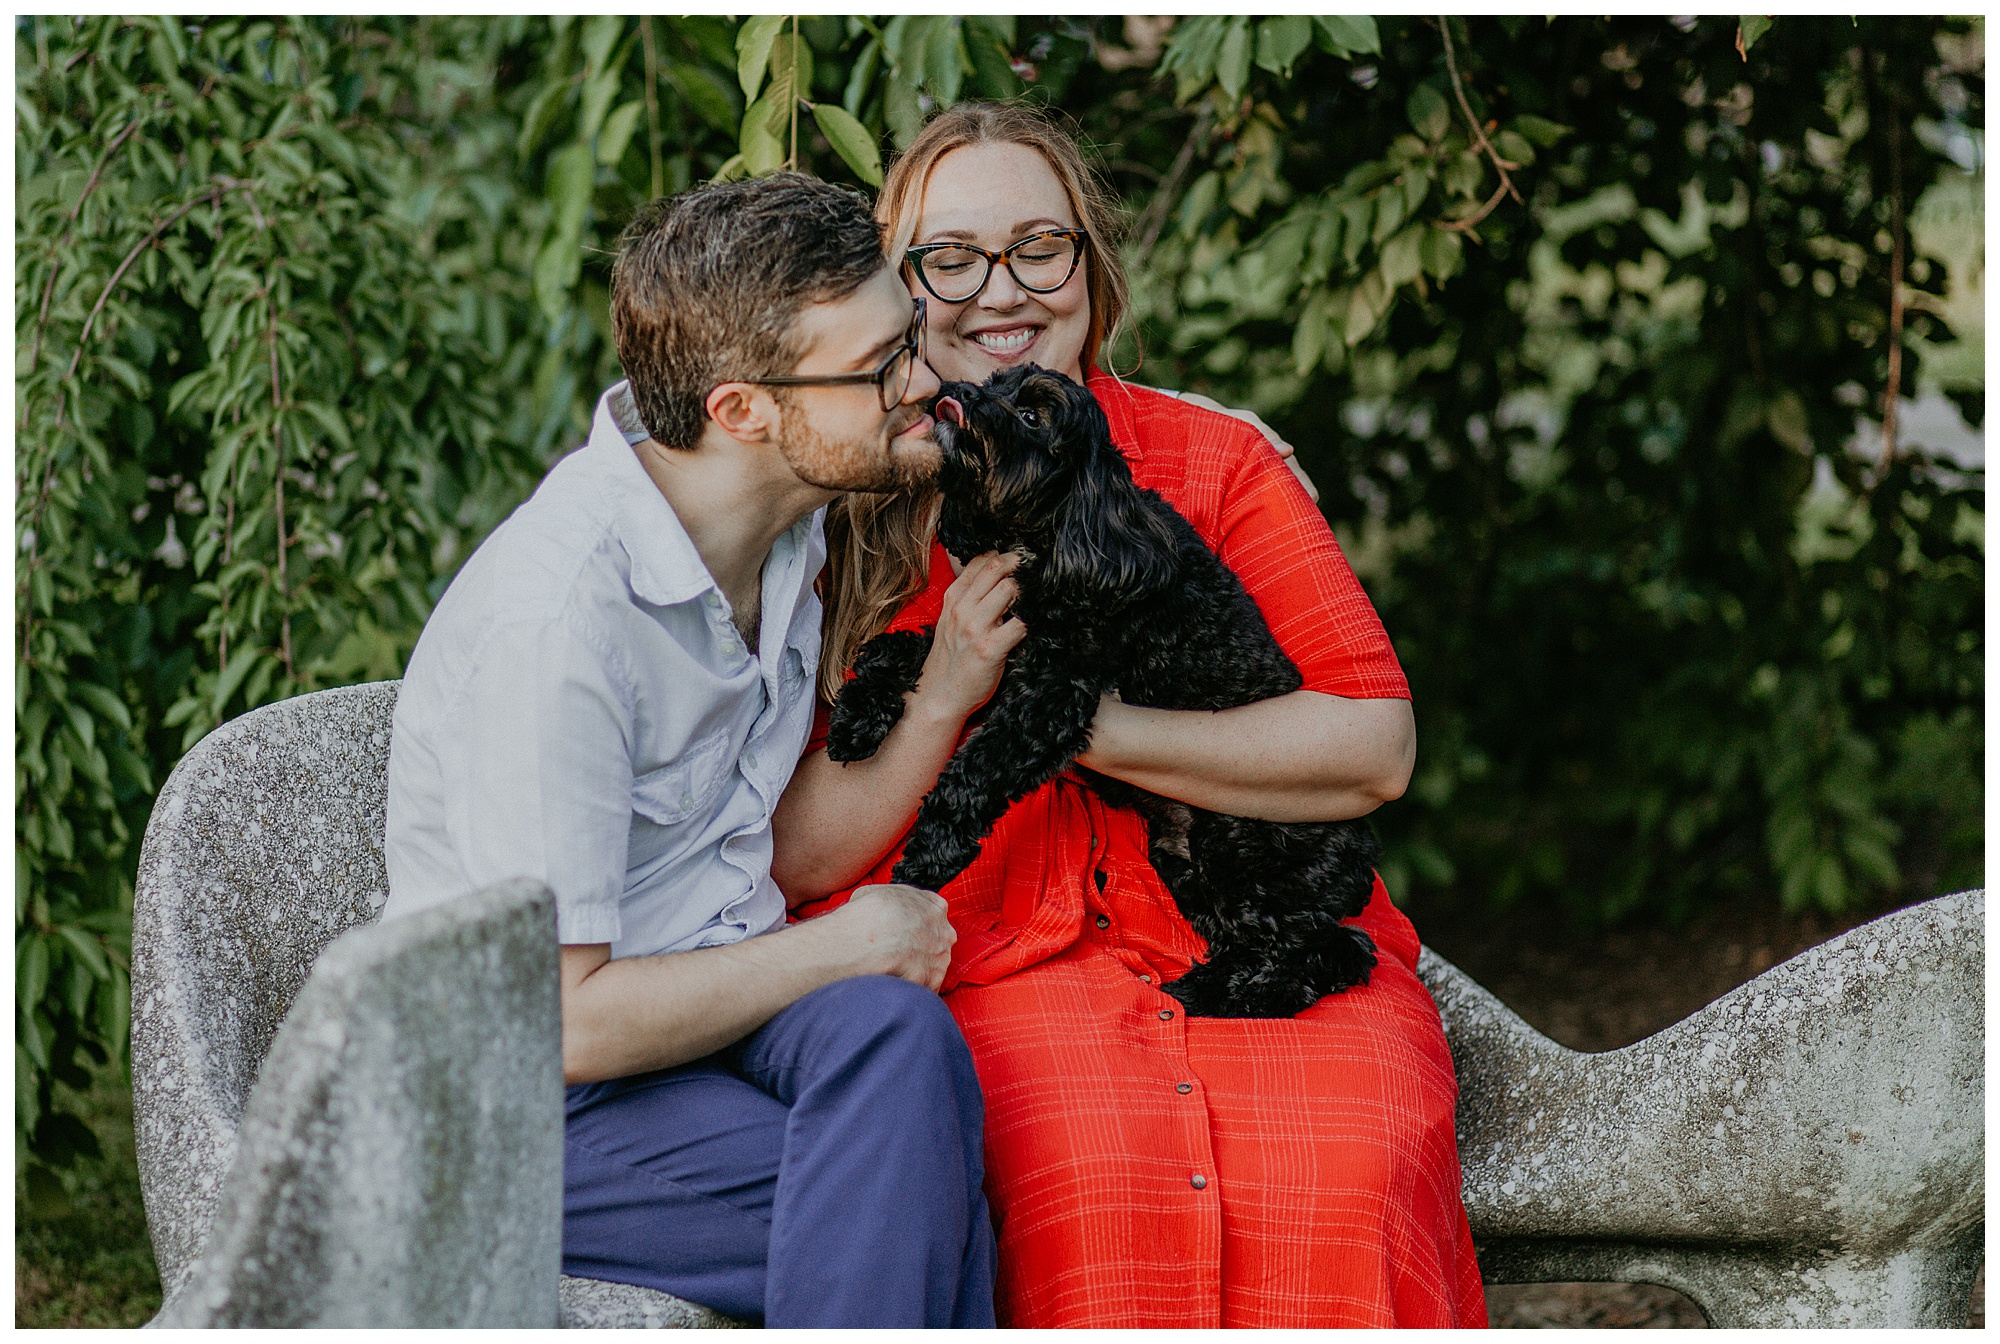 Dog licks guy's face during engagement photos, Nashville Engagement Photographer, Nashville couple, Centennial Park Engagement Photos, Nashville Engagement Photos, Centennial Park Photos, Nashville photographer, Nashville engagement ideas, nashville engagement examples, engagement photos with a dog